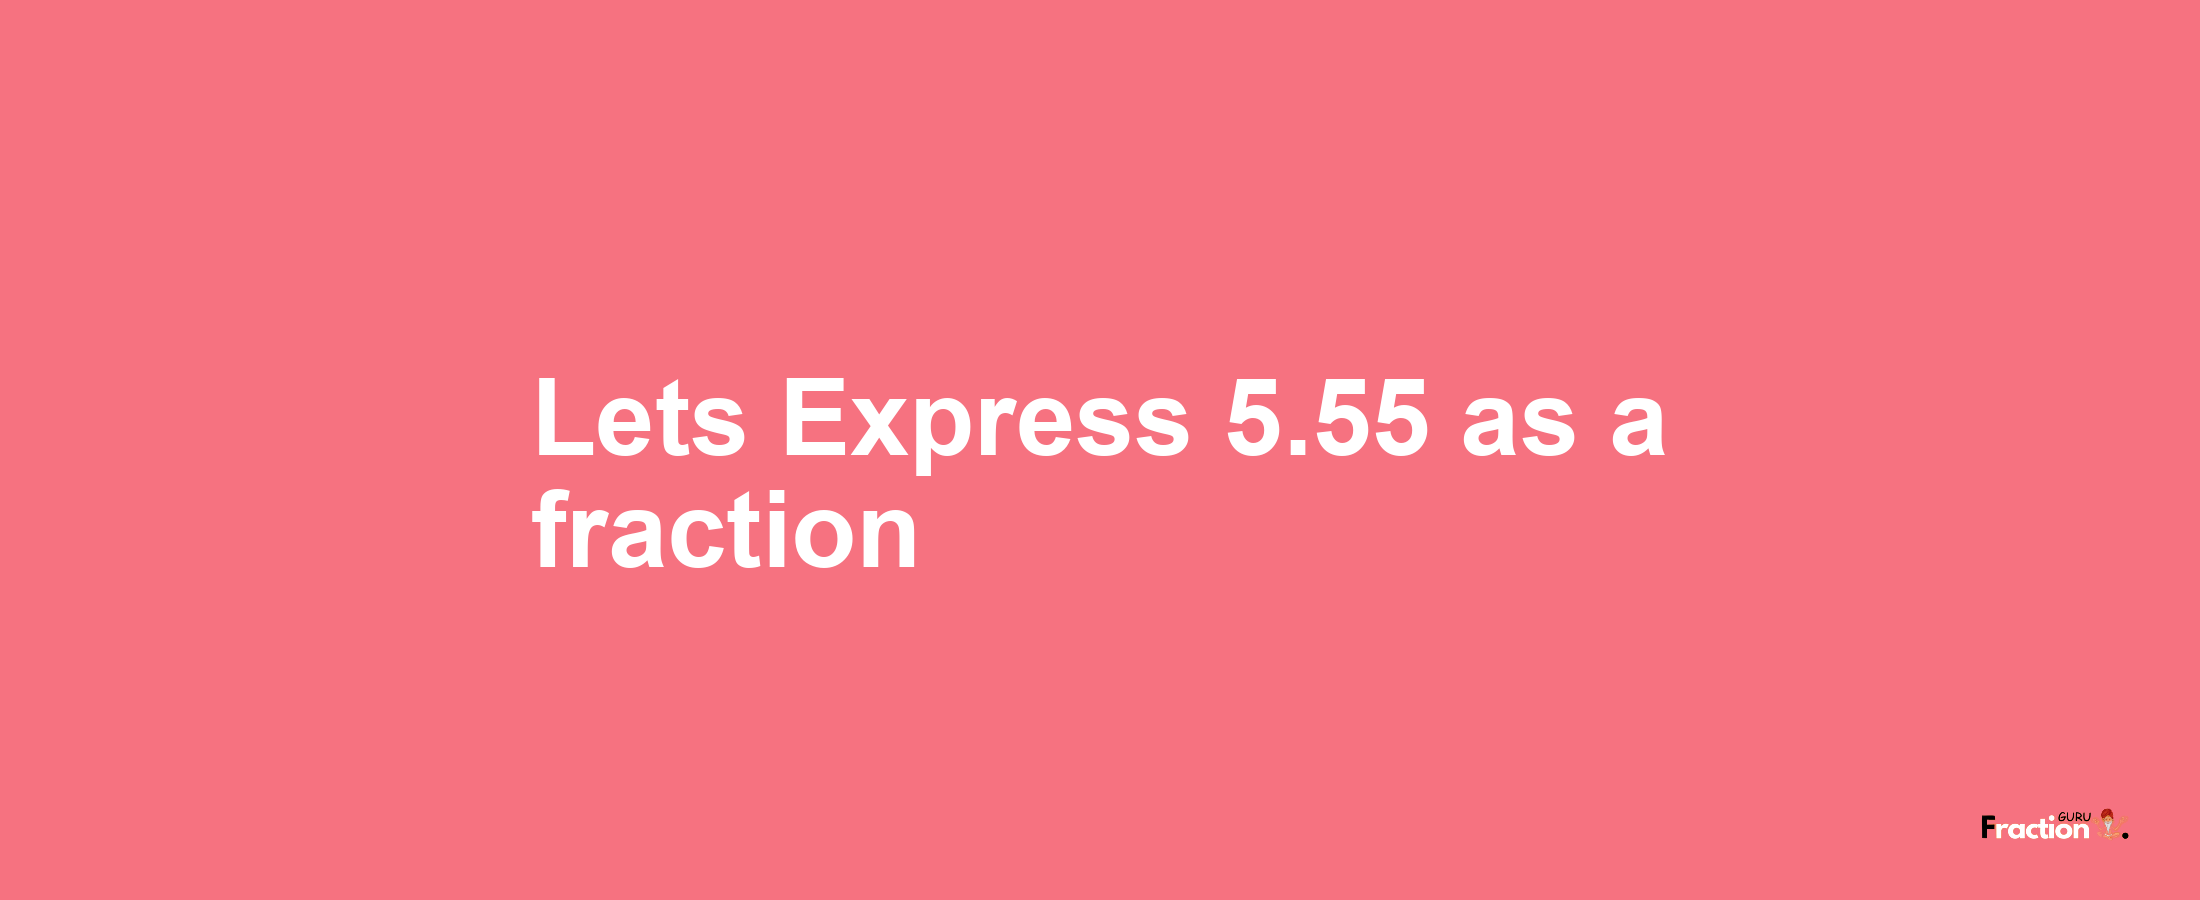 Lets Express 5.55 as afraction